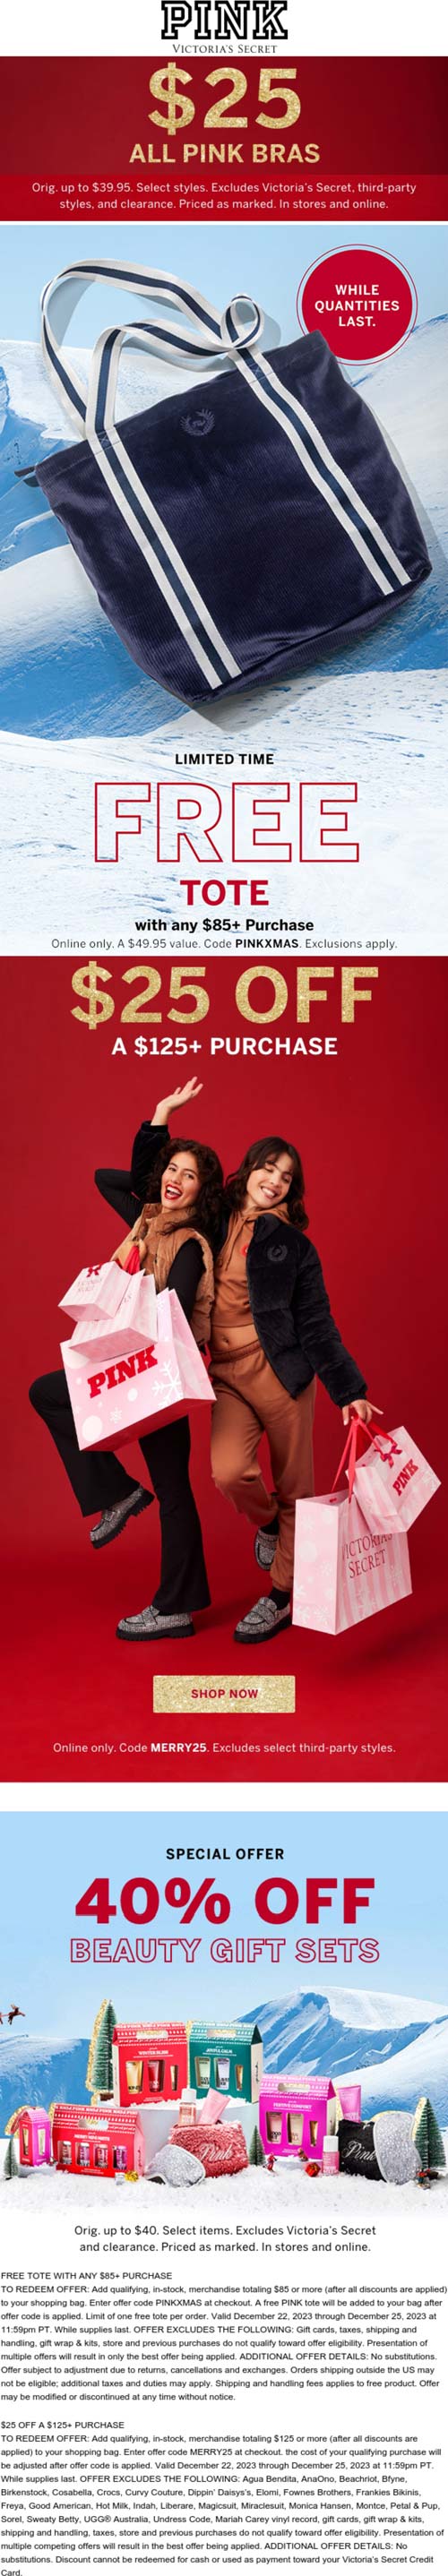 Free tote on $85, 40% off gift sets & $25 off $125 at PINK via promo code PINXMAS and MERRY25 #pink